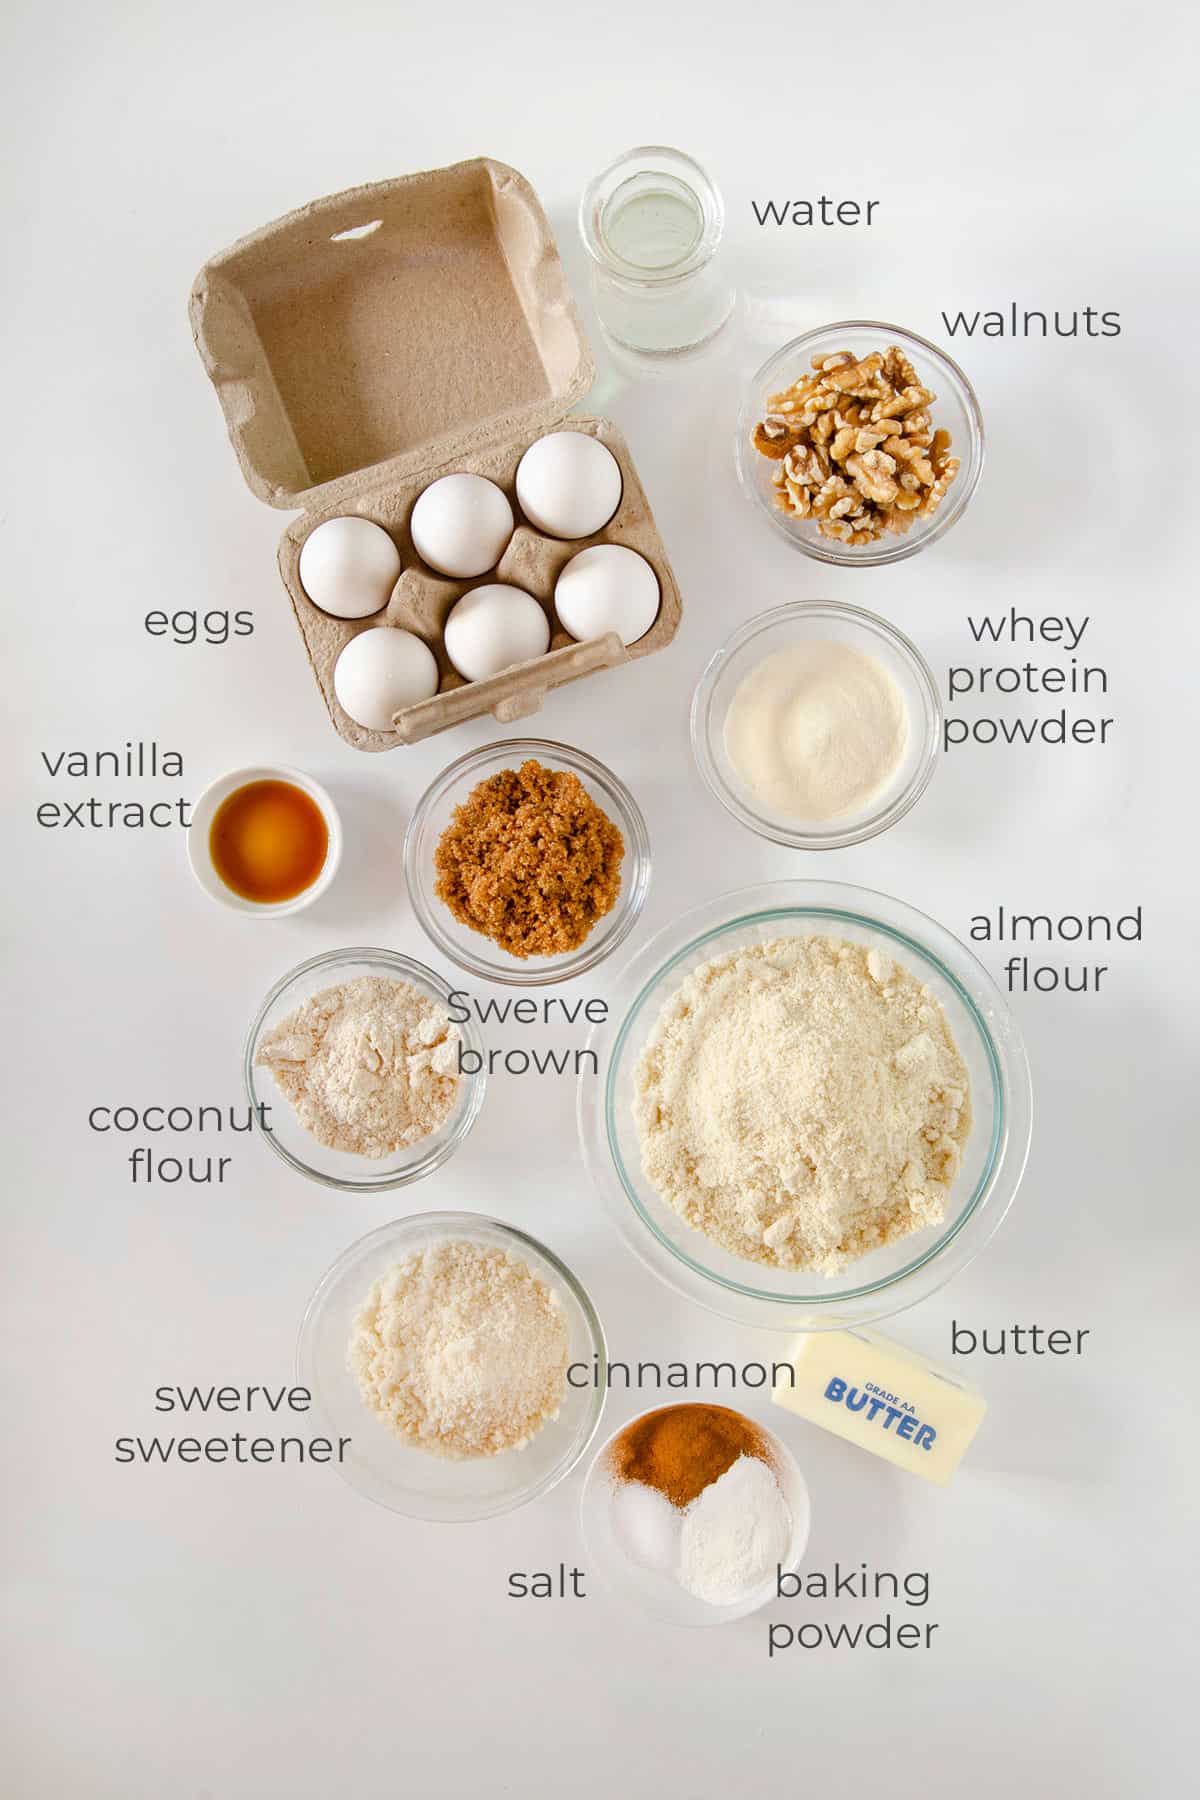 Top down image of the ingredients for keto coffee cake, with labels.